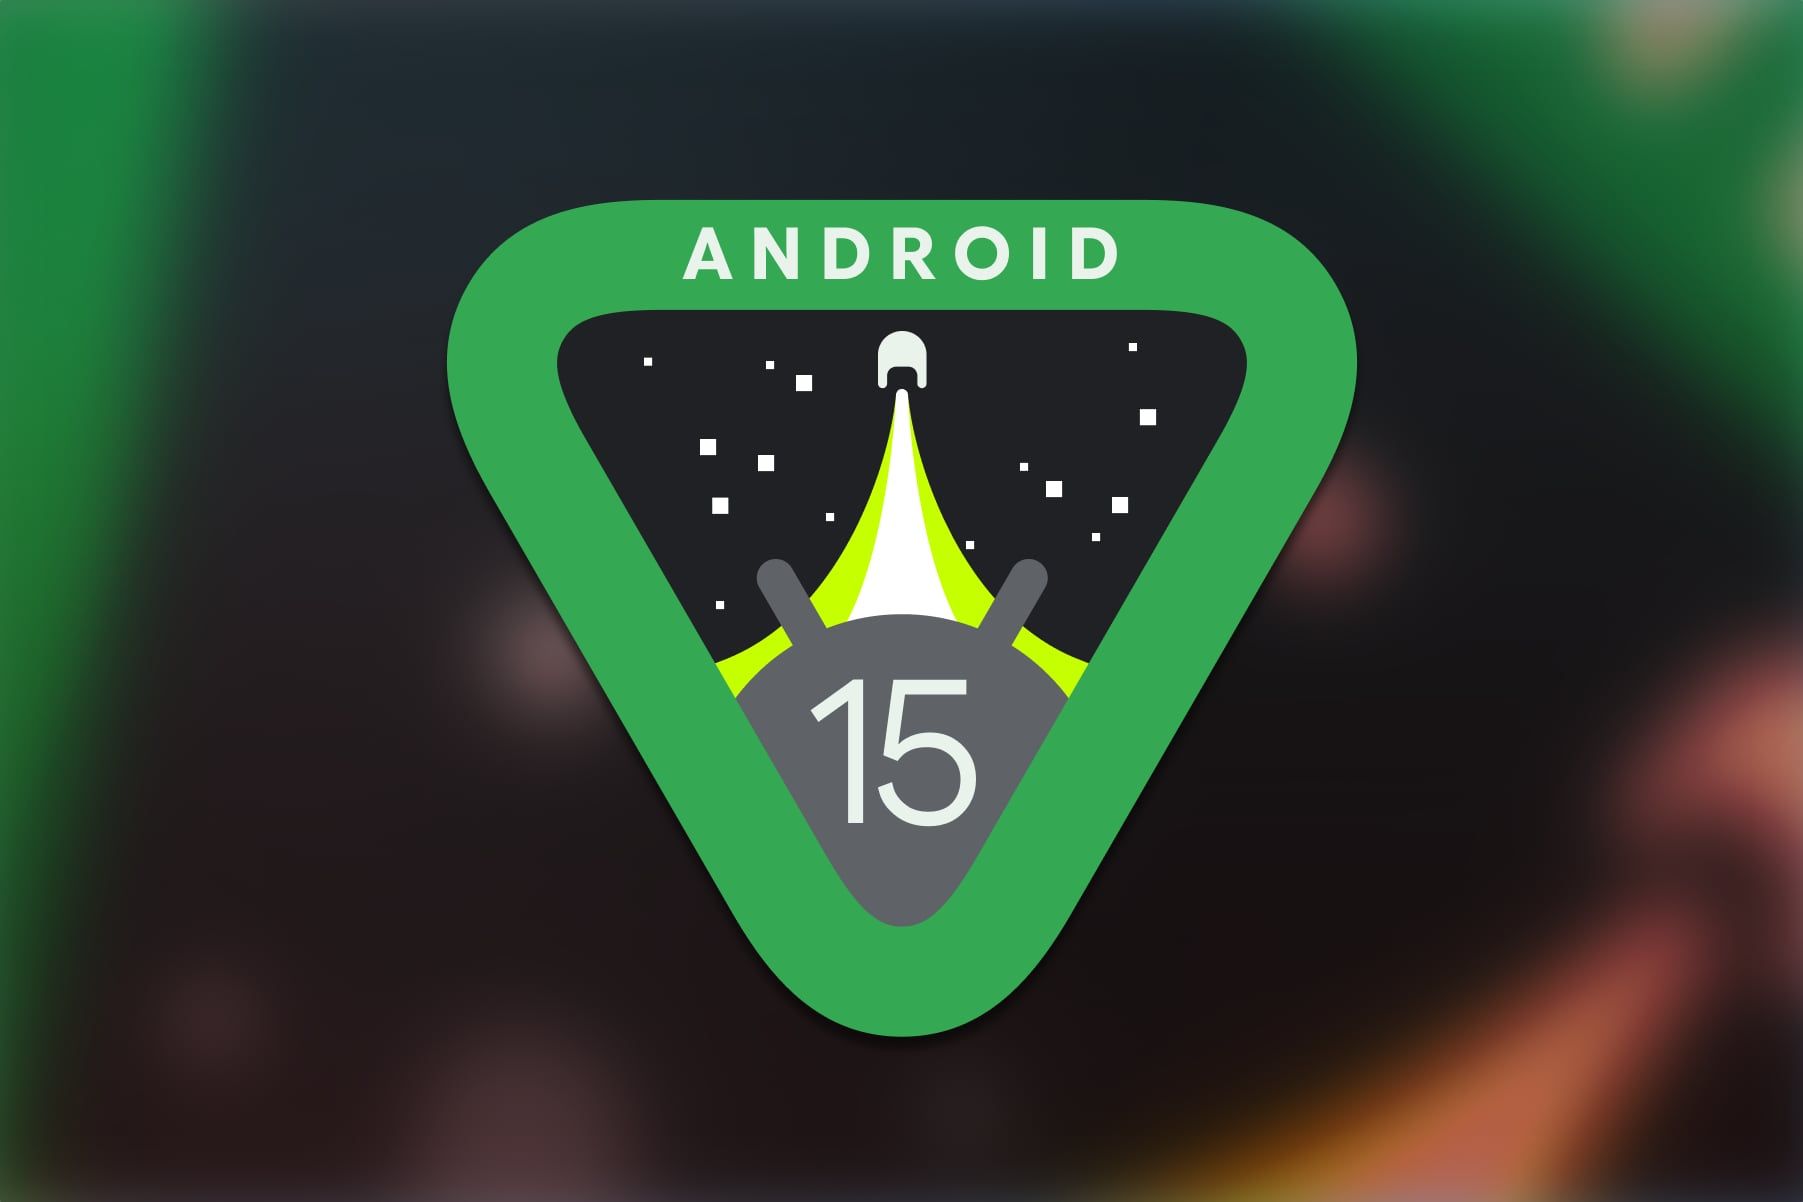 Official Android 15 badge